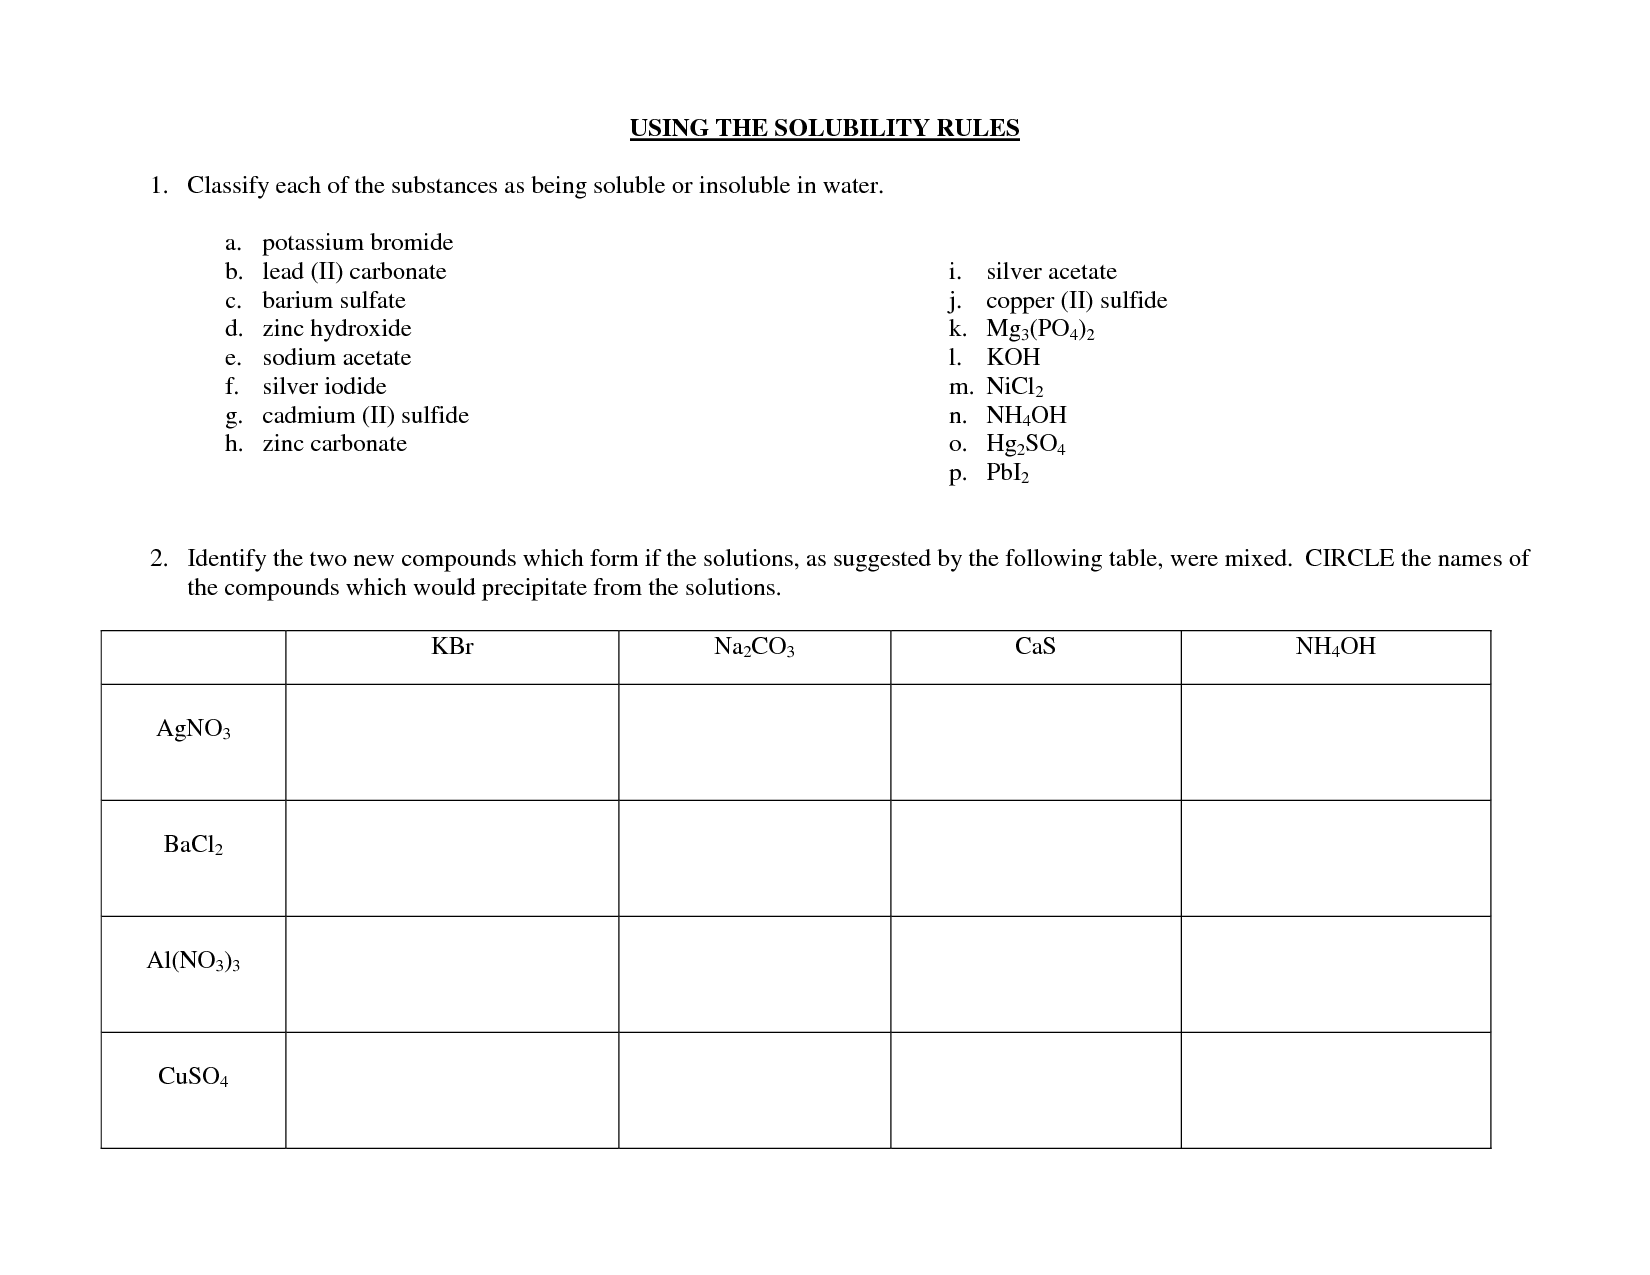 15-best-images-of-who-rules-worksheet-divisibility-rules-worksheet-solubility-rules-worksheet